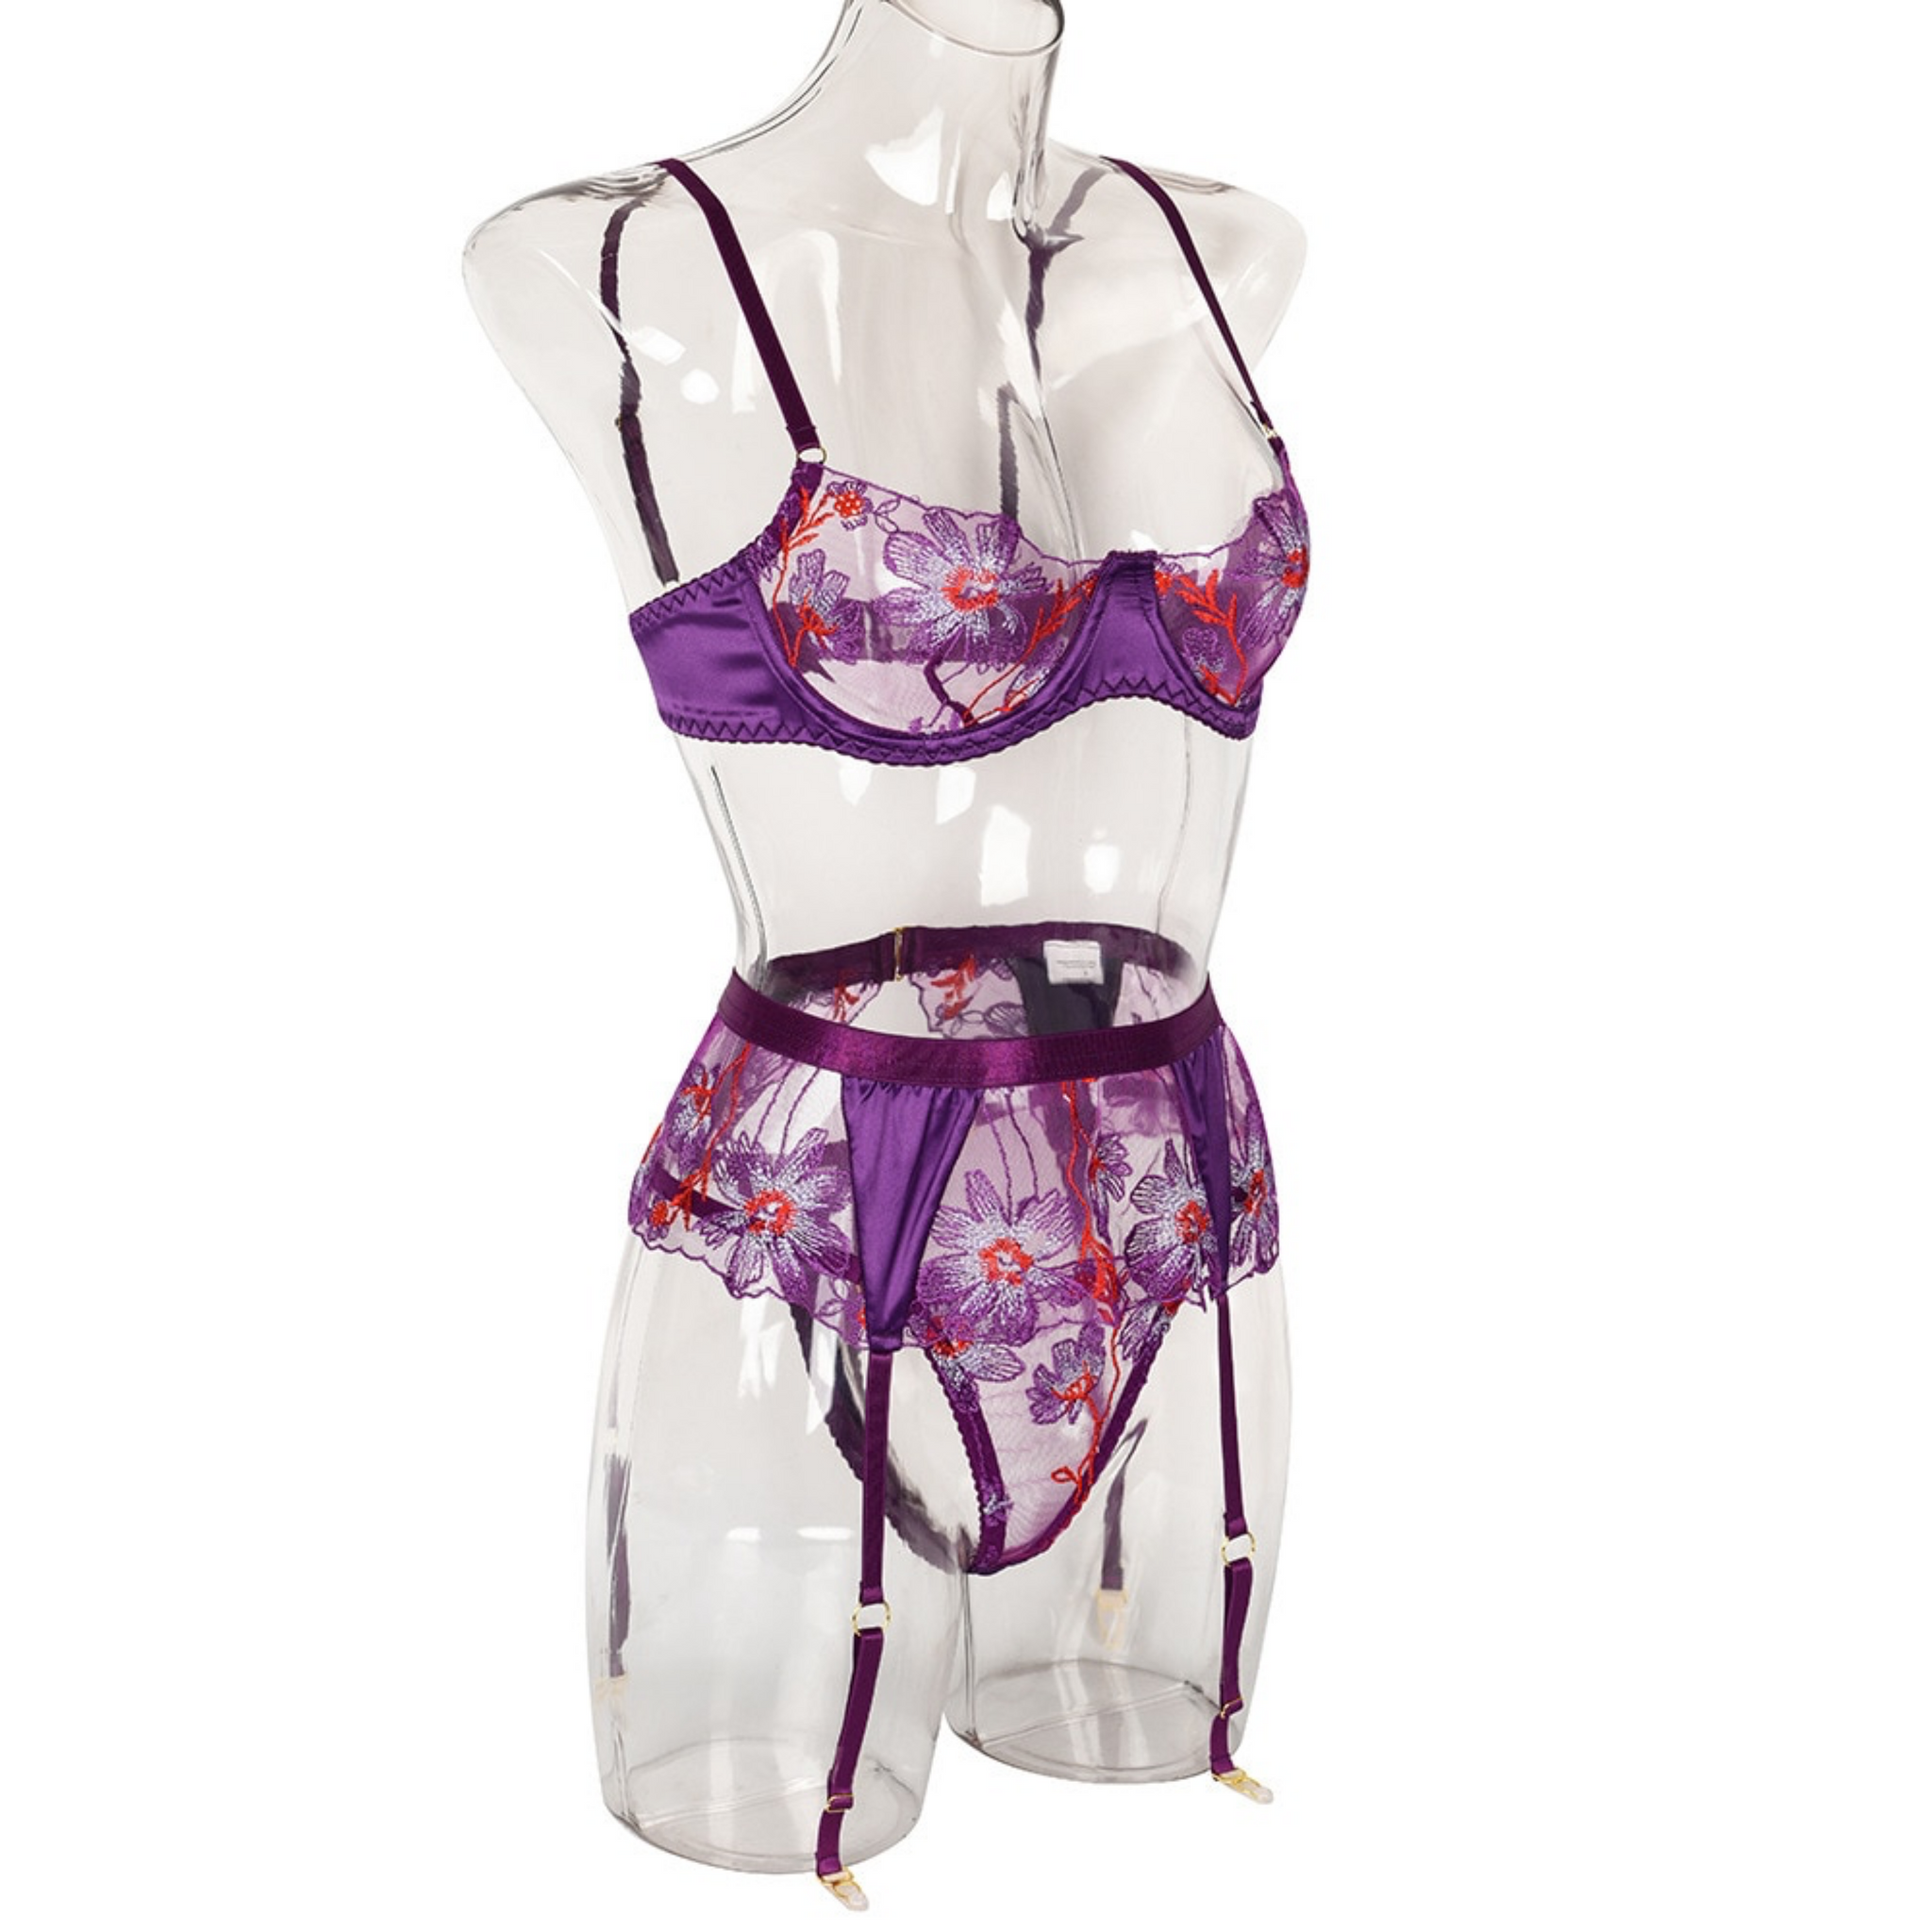 Thinking Of Your Touch Lace 3 Piece Set - Purple